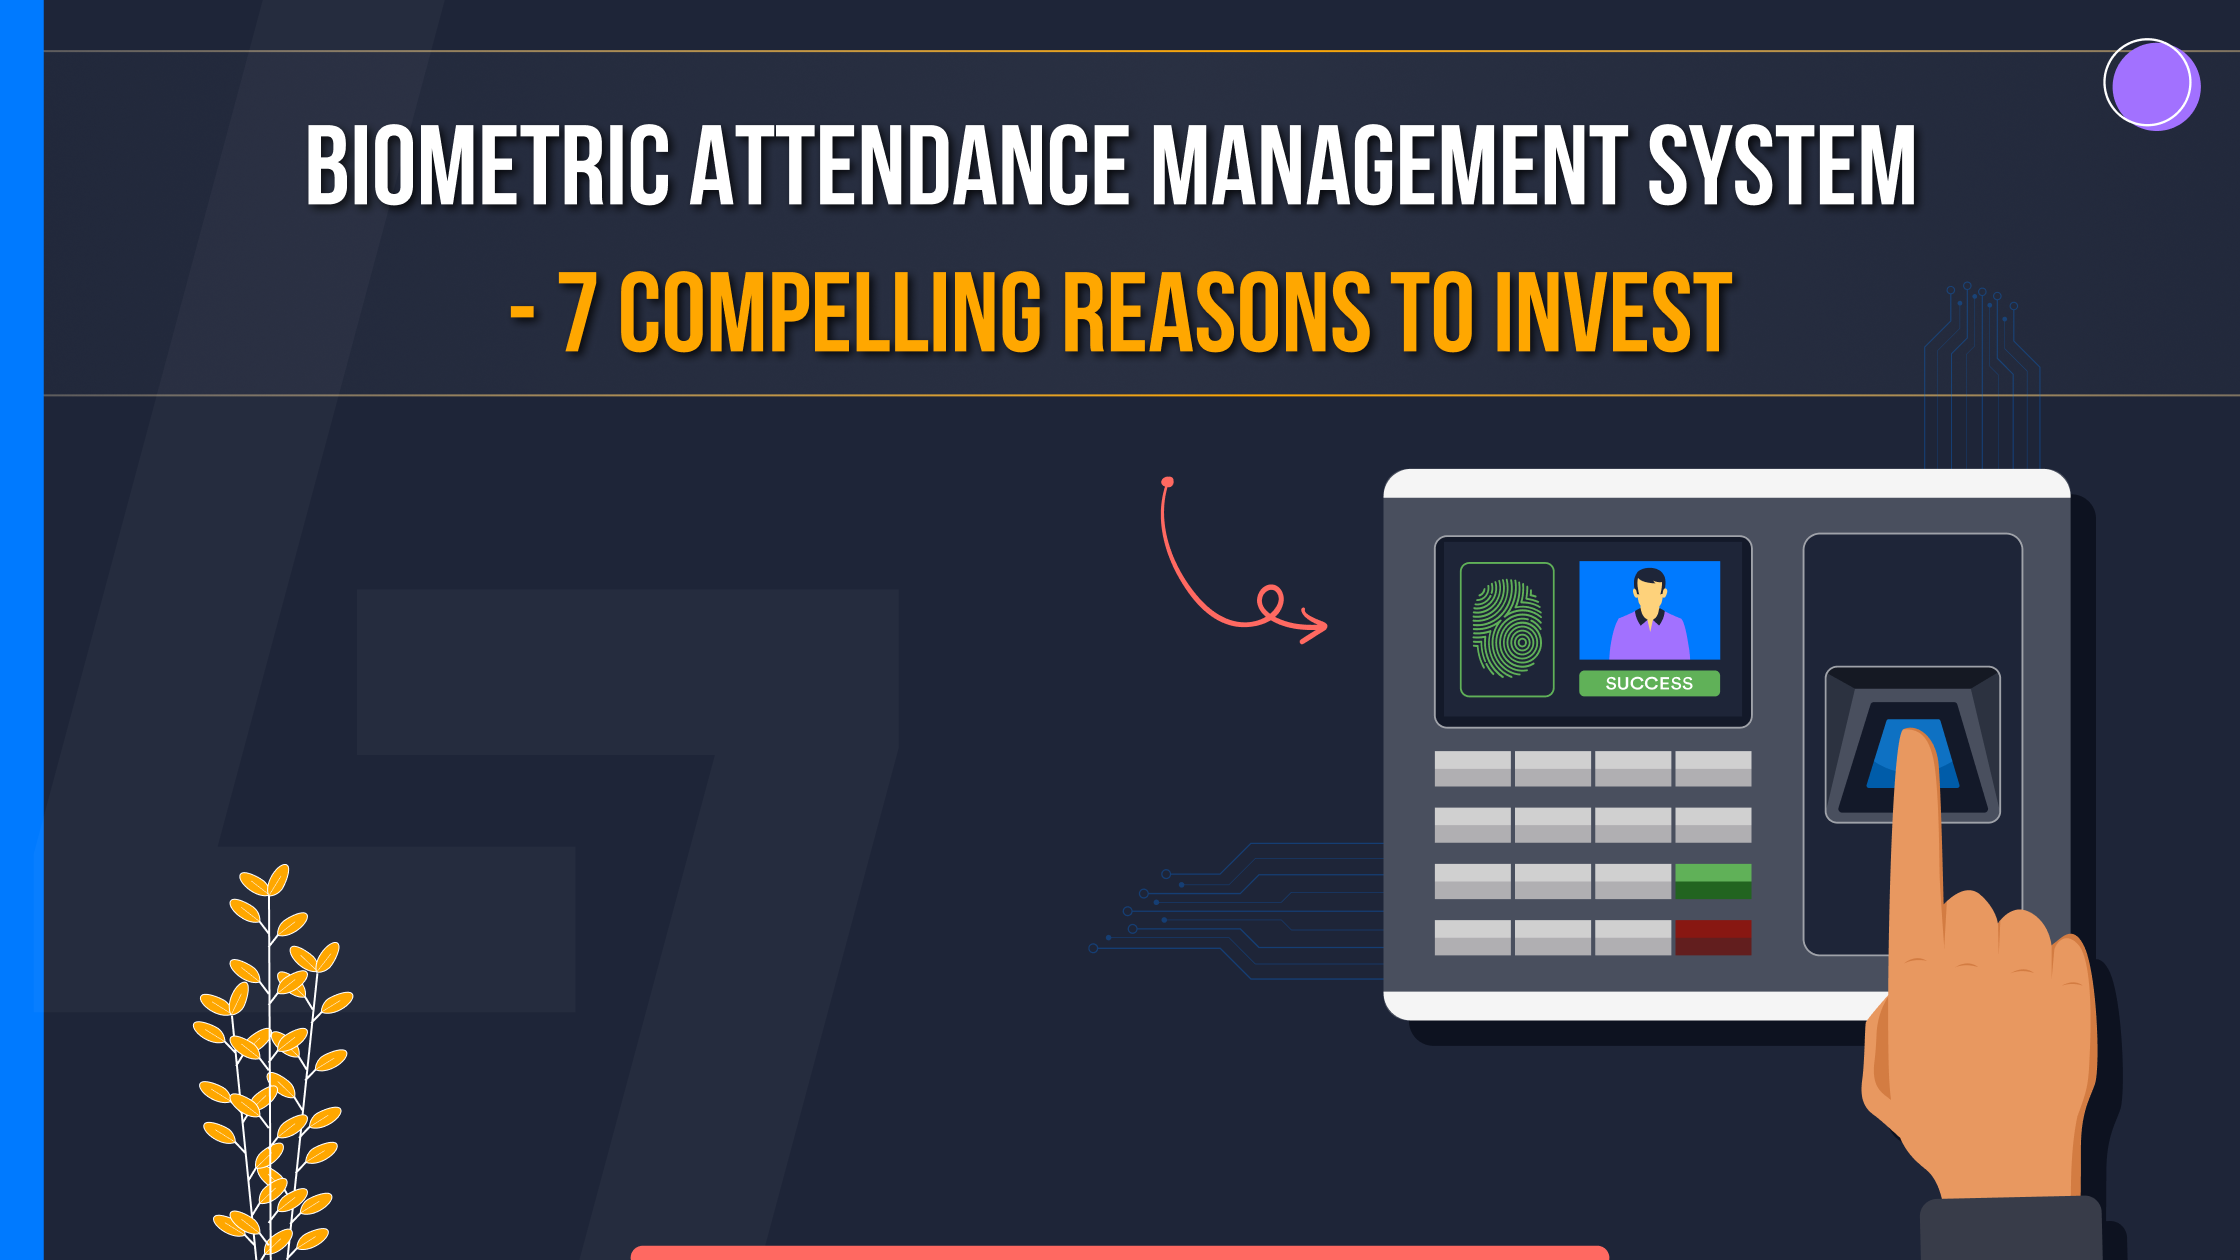 Biometric Attendance Management System 7 Compelling Reasons to Invest